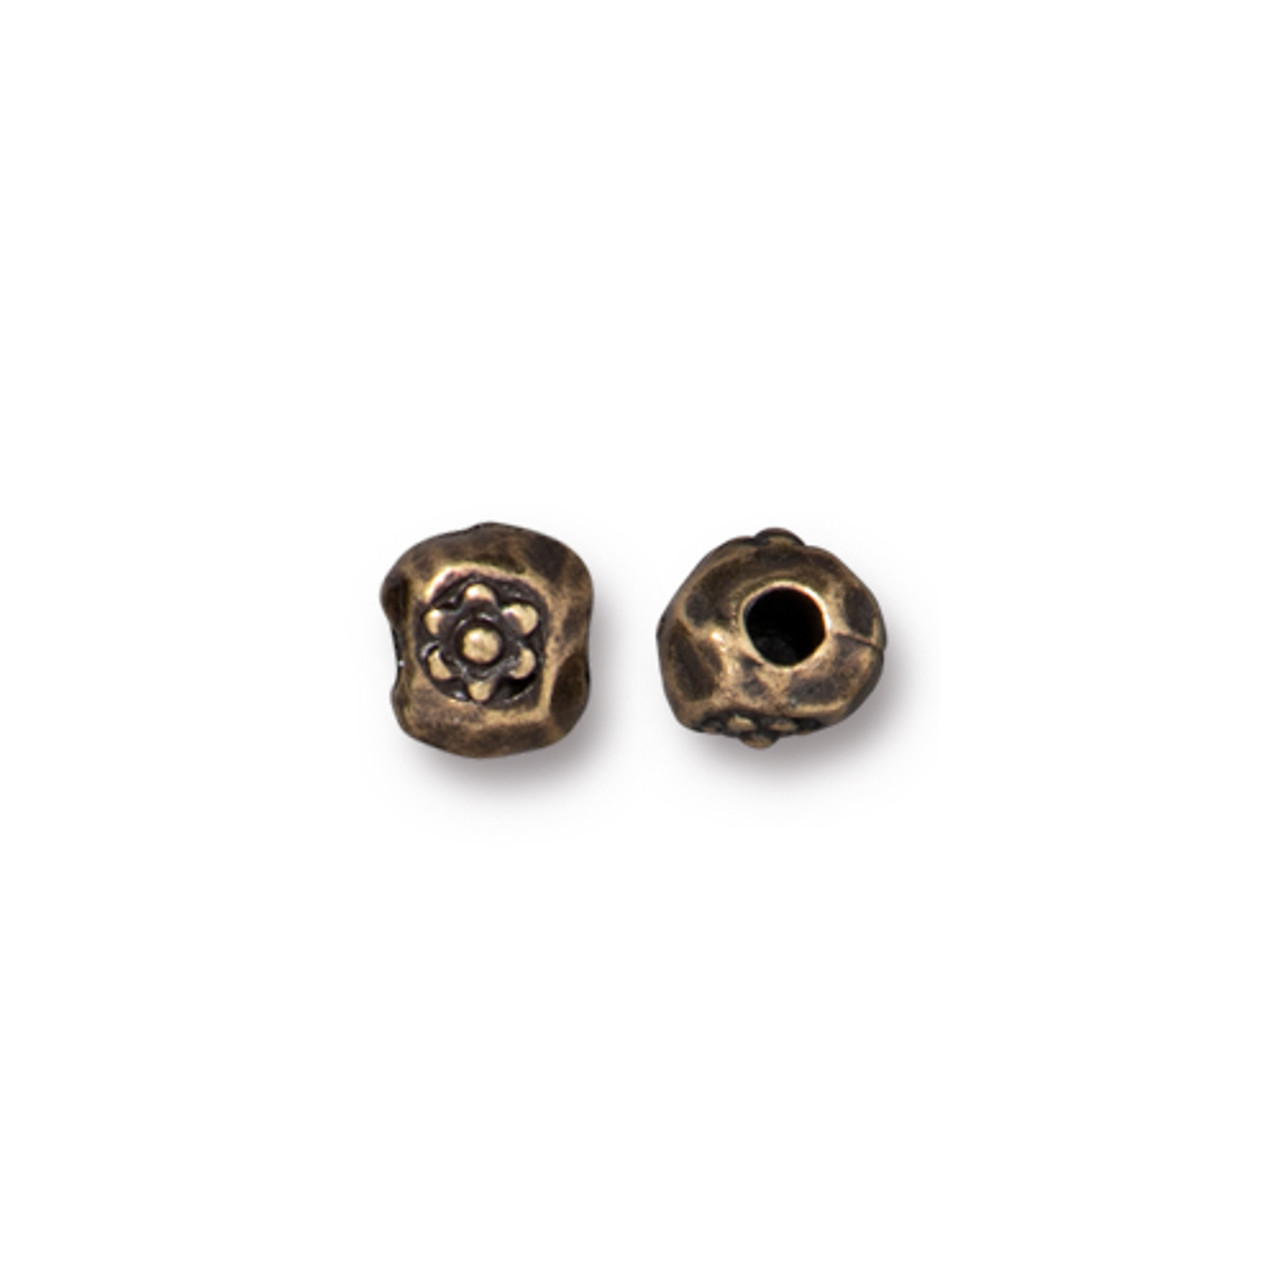 Flower Nugget Large Hole Spacer Bead, Oxidized Brass Plate, 50 per Pack -  TierraCast, Inc.